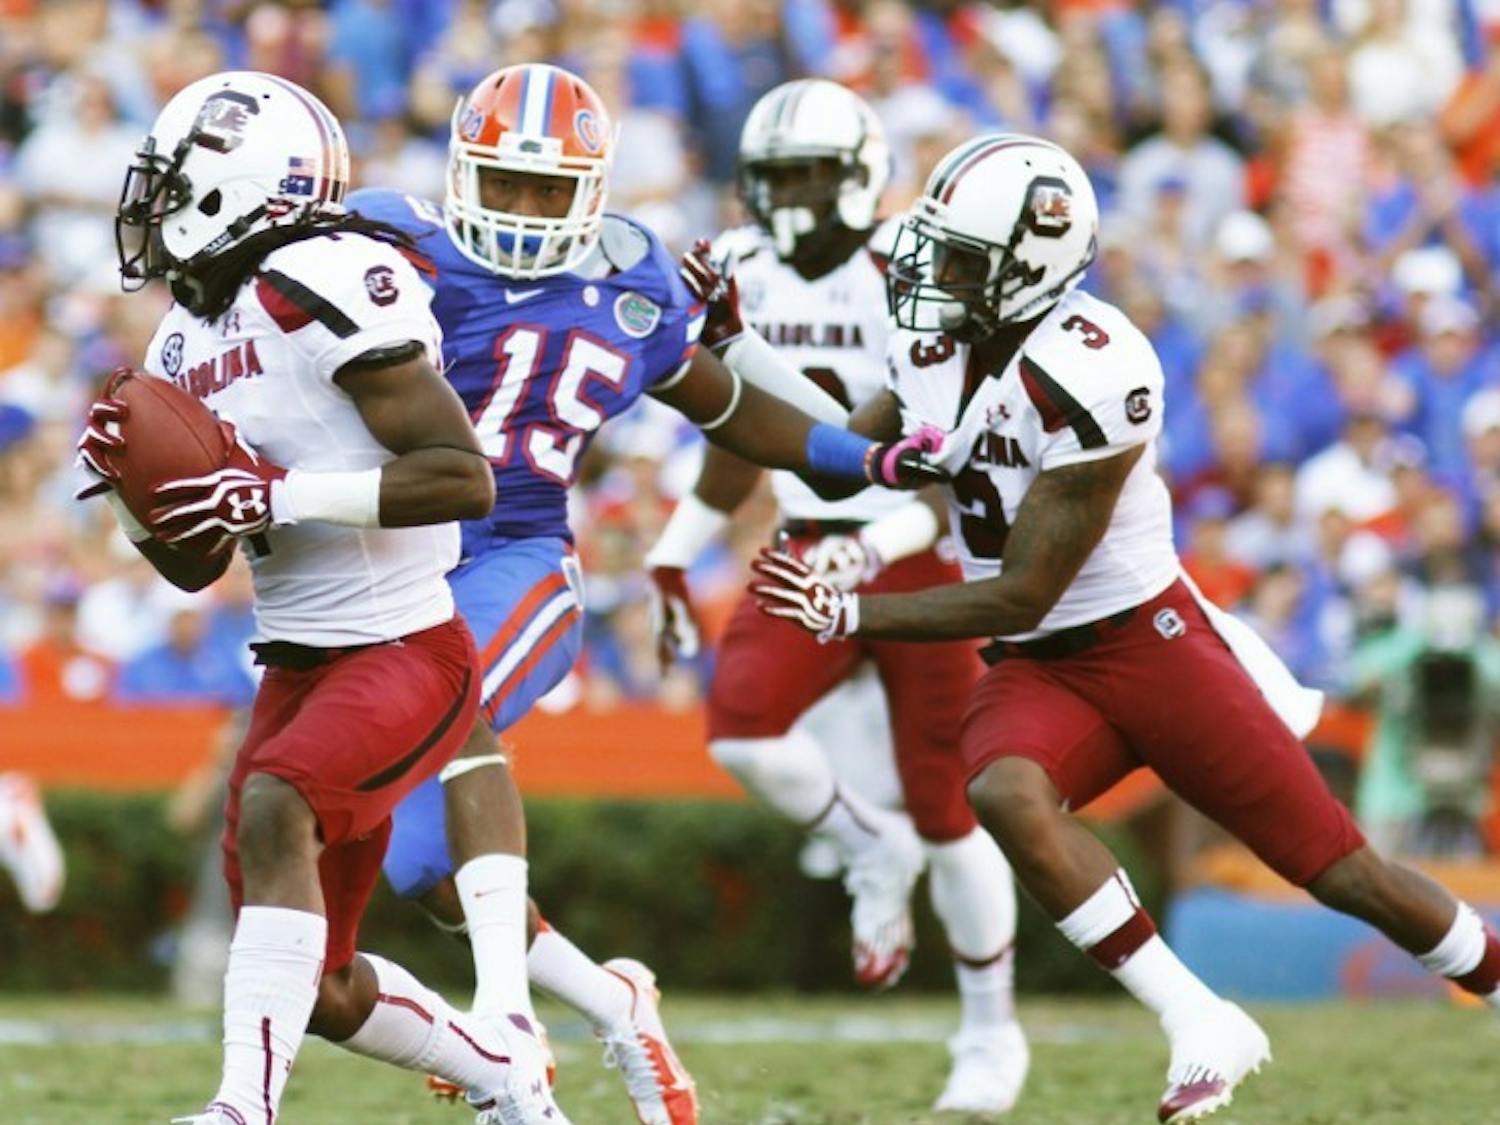 Gunner Loucheiz Purifoy (15) chases South Carolina punt returner Ace Sanders (1) during UF’s 44-11 win on Saturday at Ben Hill Griffin Stadium. Purifoy forced two fumbles in the game.
